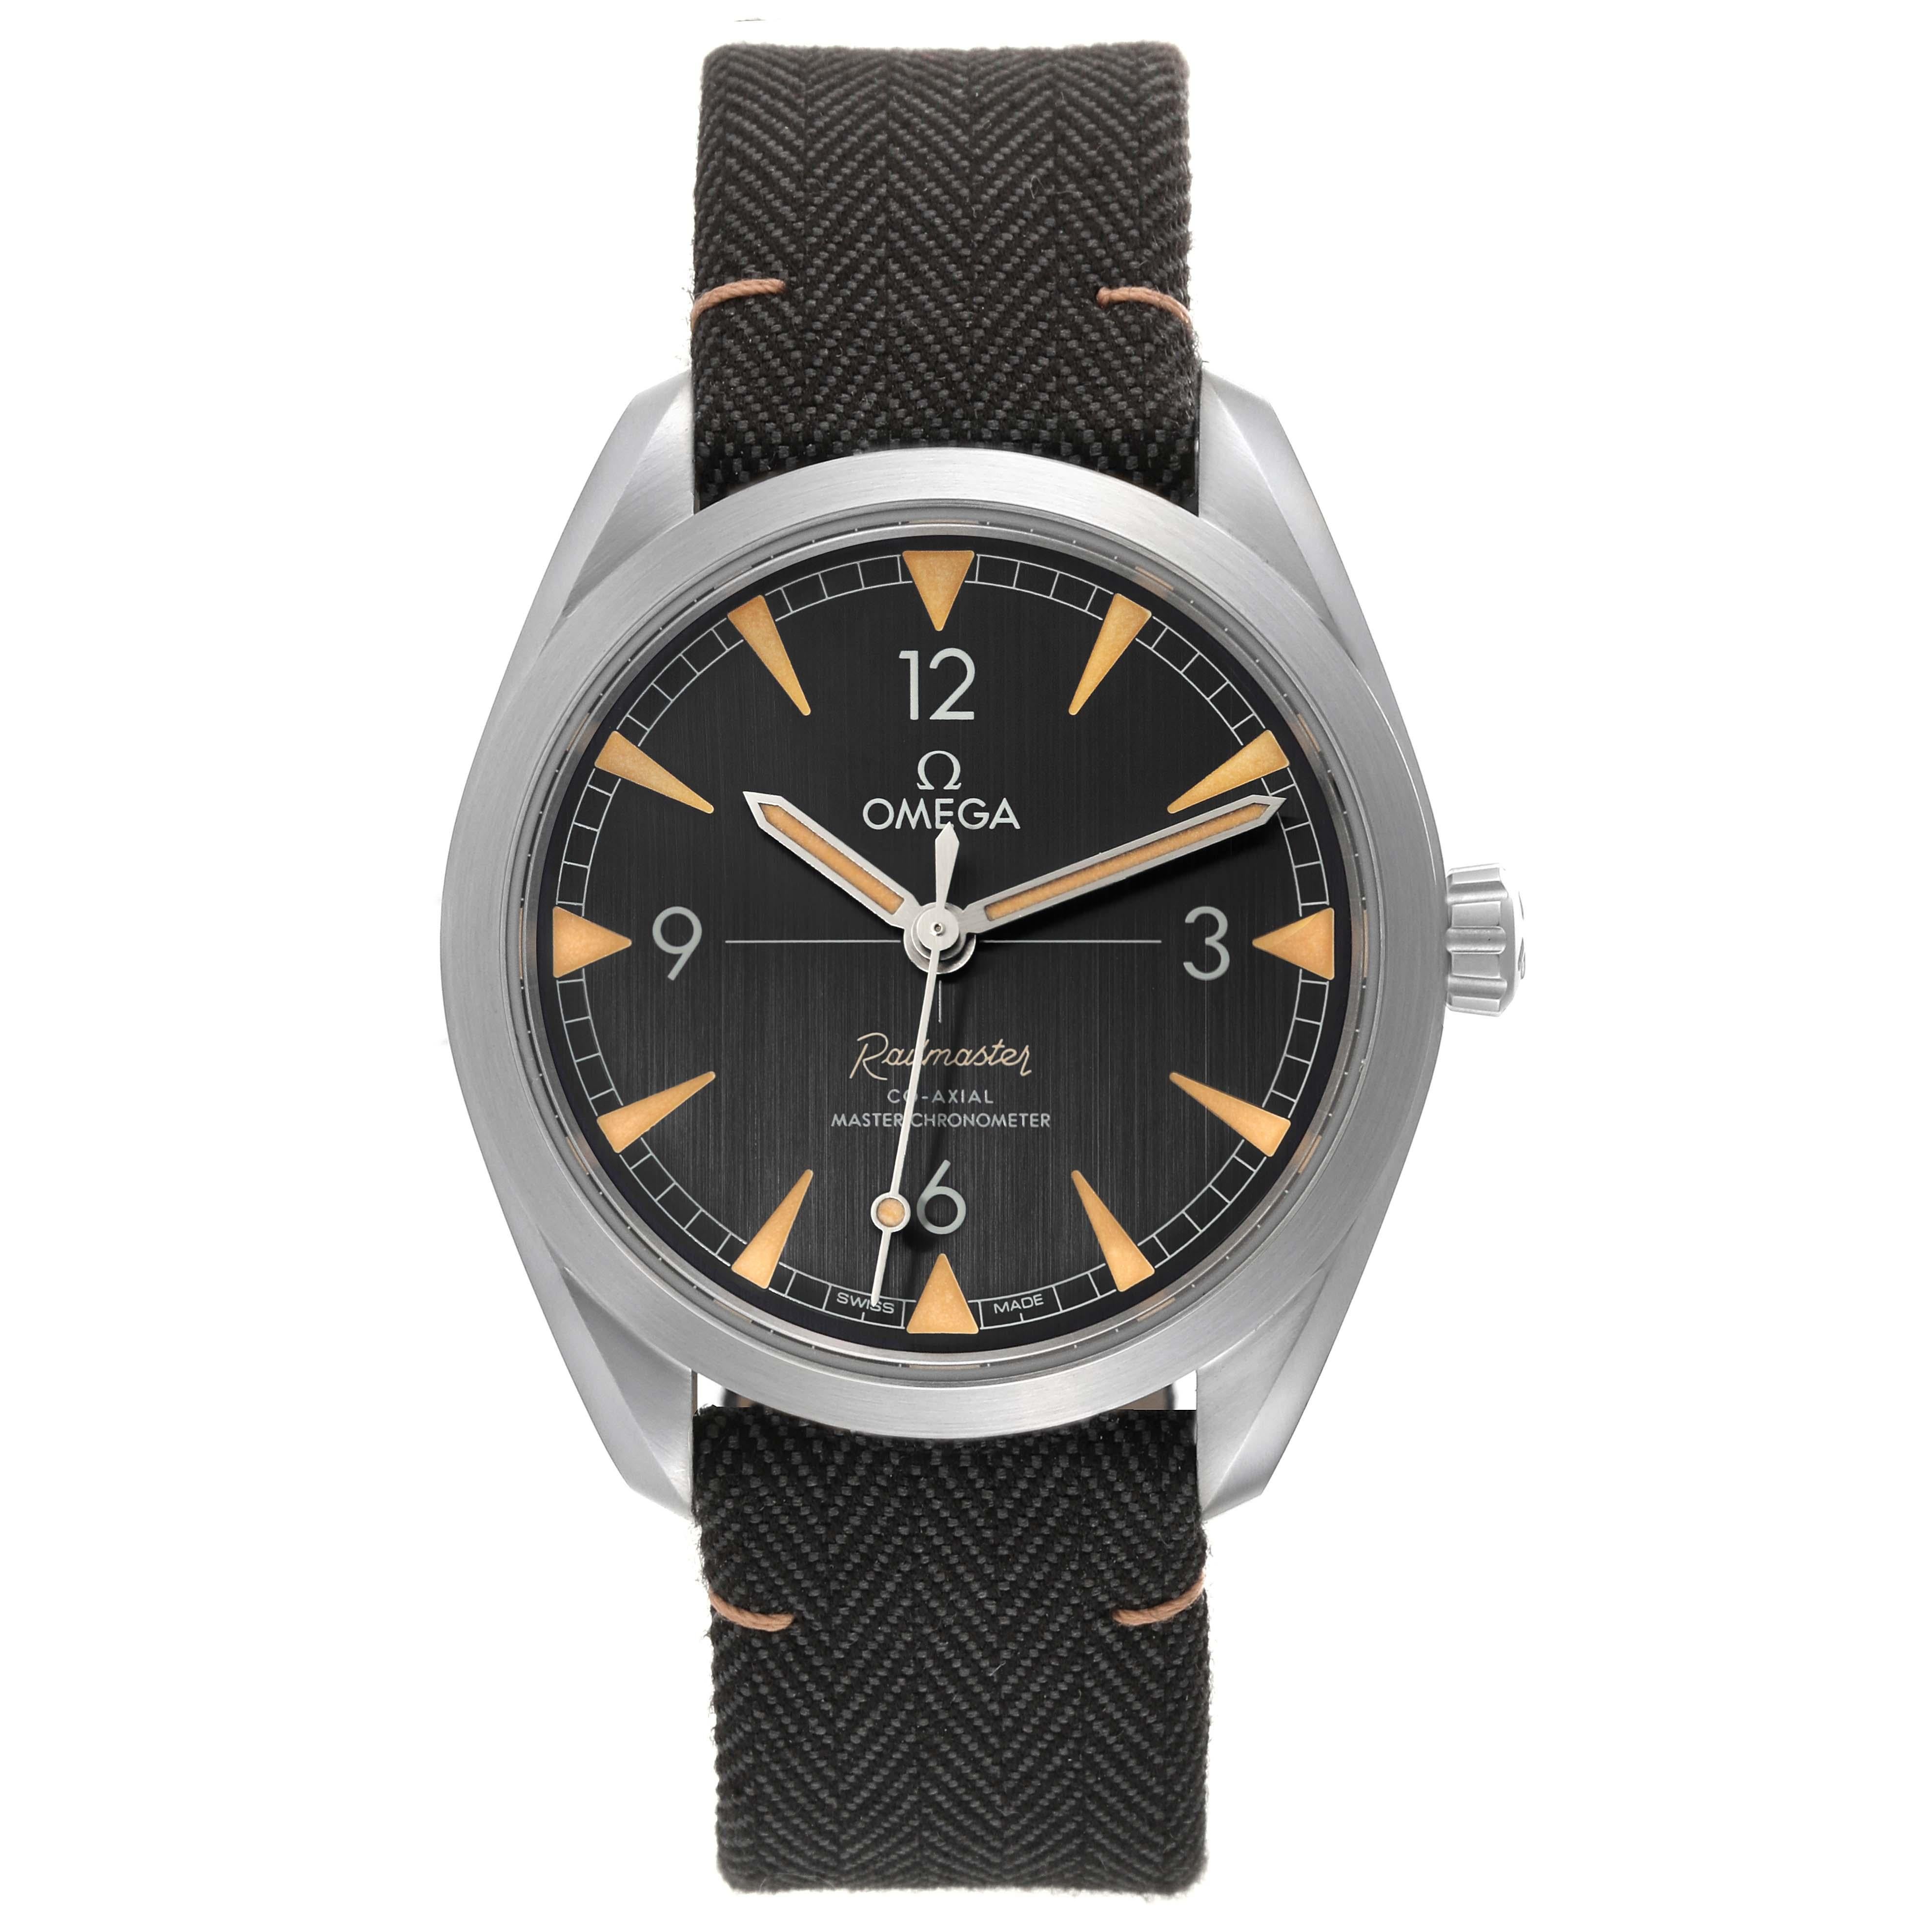 Omega Railmaster Co-Axial Master Steel Mens Watch 220.12.40.20.01.001 Unworn. Automatic self-winding movement with Co-Axial escapement.Certified Master Chronometer, approved by METAS,resistant to magnetic fields reaching 15,000 gauss.Free